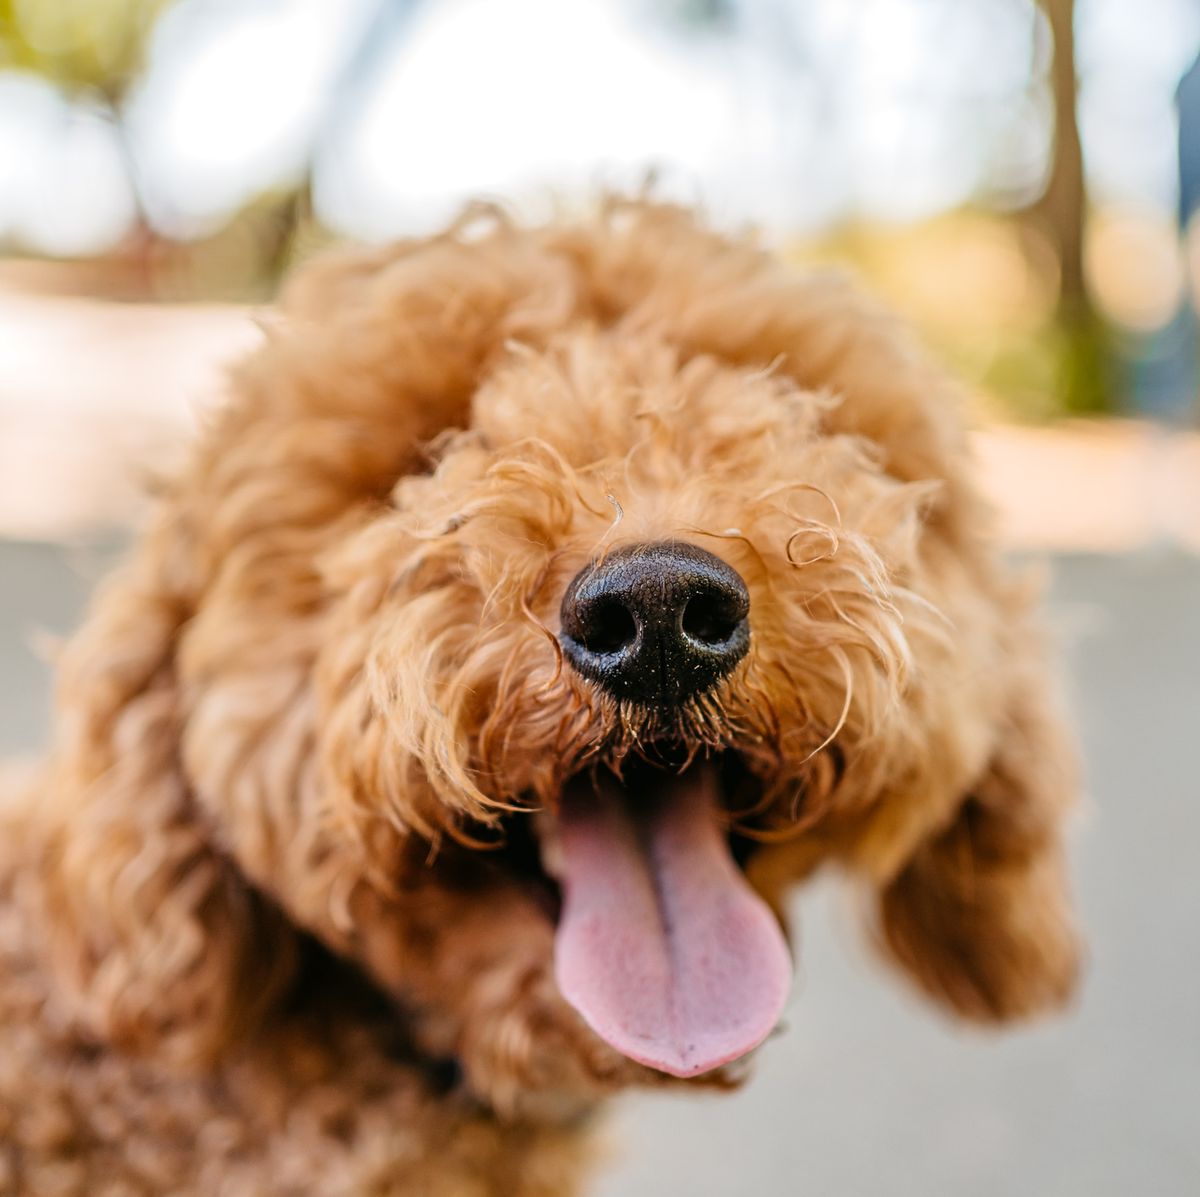 https://hips.hearstapps.com/hmg-prod/images/cute-labradoodle-dog-in-the-park-royalty-free-image-1699391675.jpg?crop=0.668xw:1.00xh;0.130xw,0&resize=1200:*